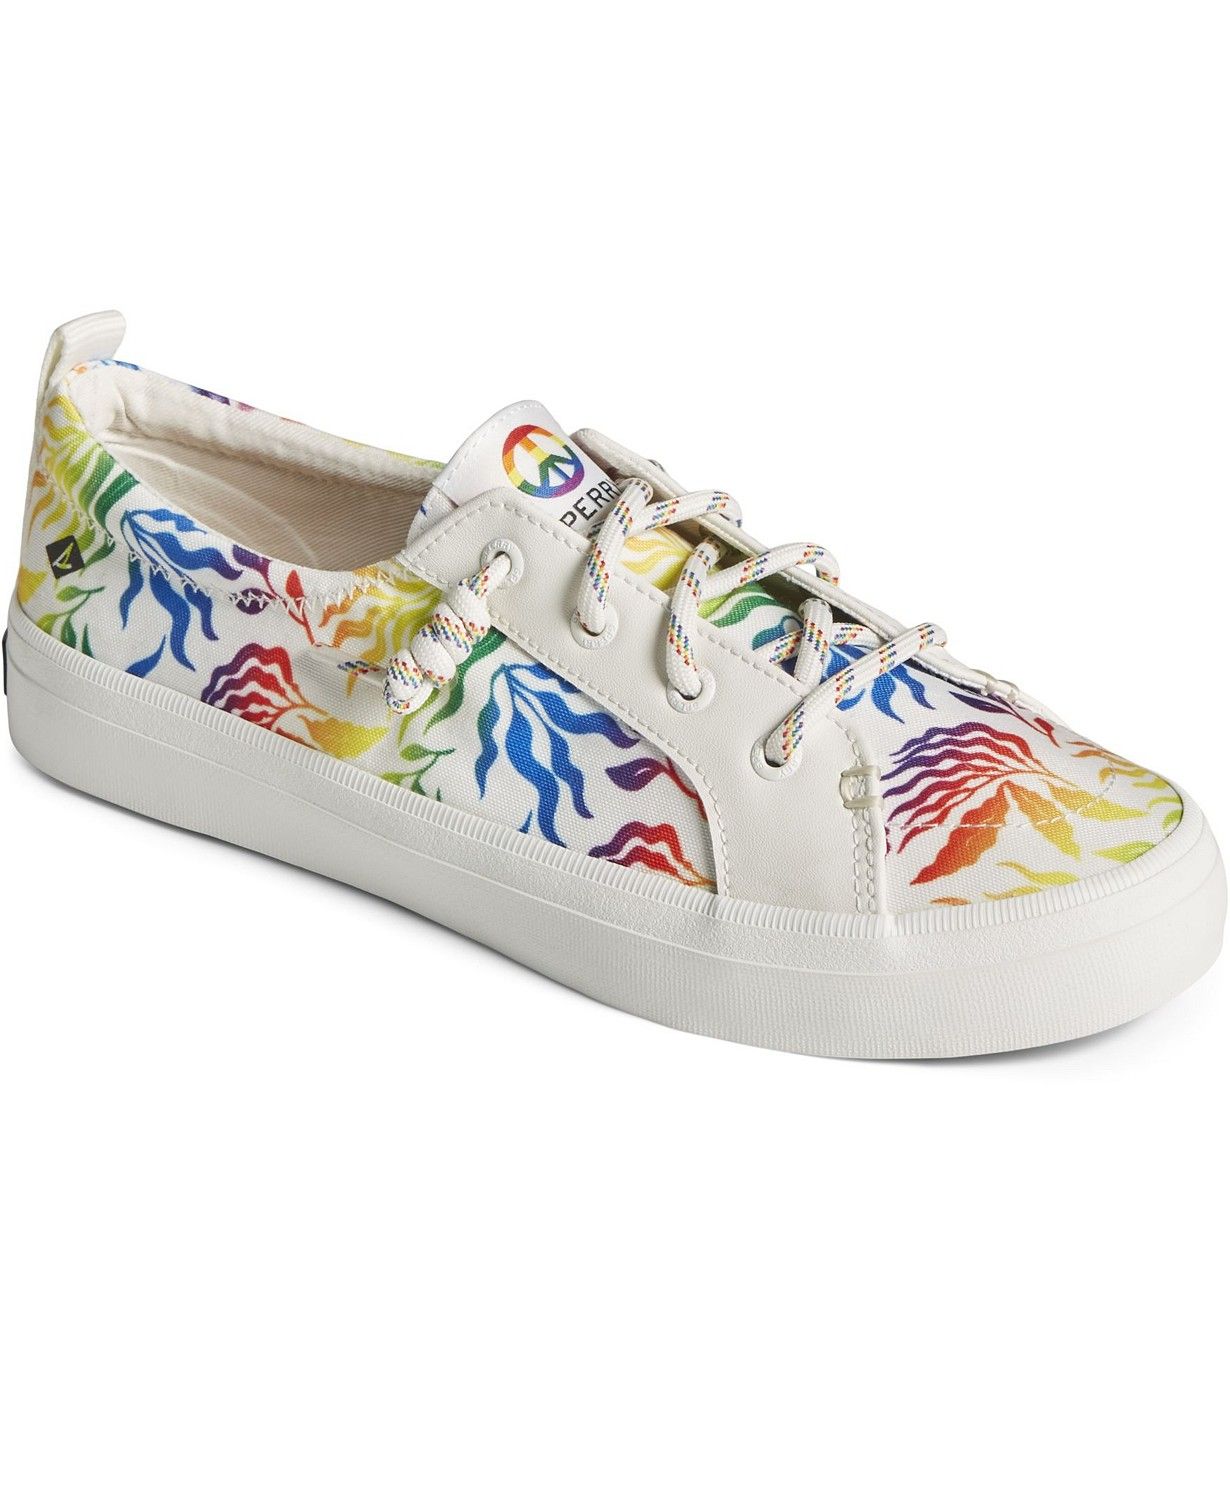 Sperry Women's Crest Vibe Pride Sneakers & Reviews - Athletic Shoes & Sneakers - Shoes - Macy's | Macys (US)